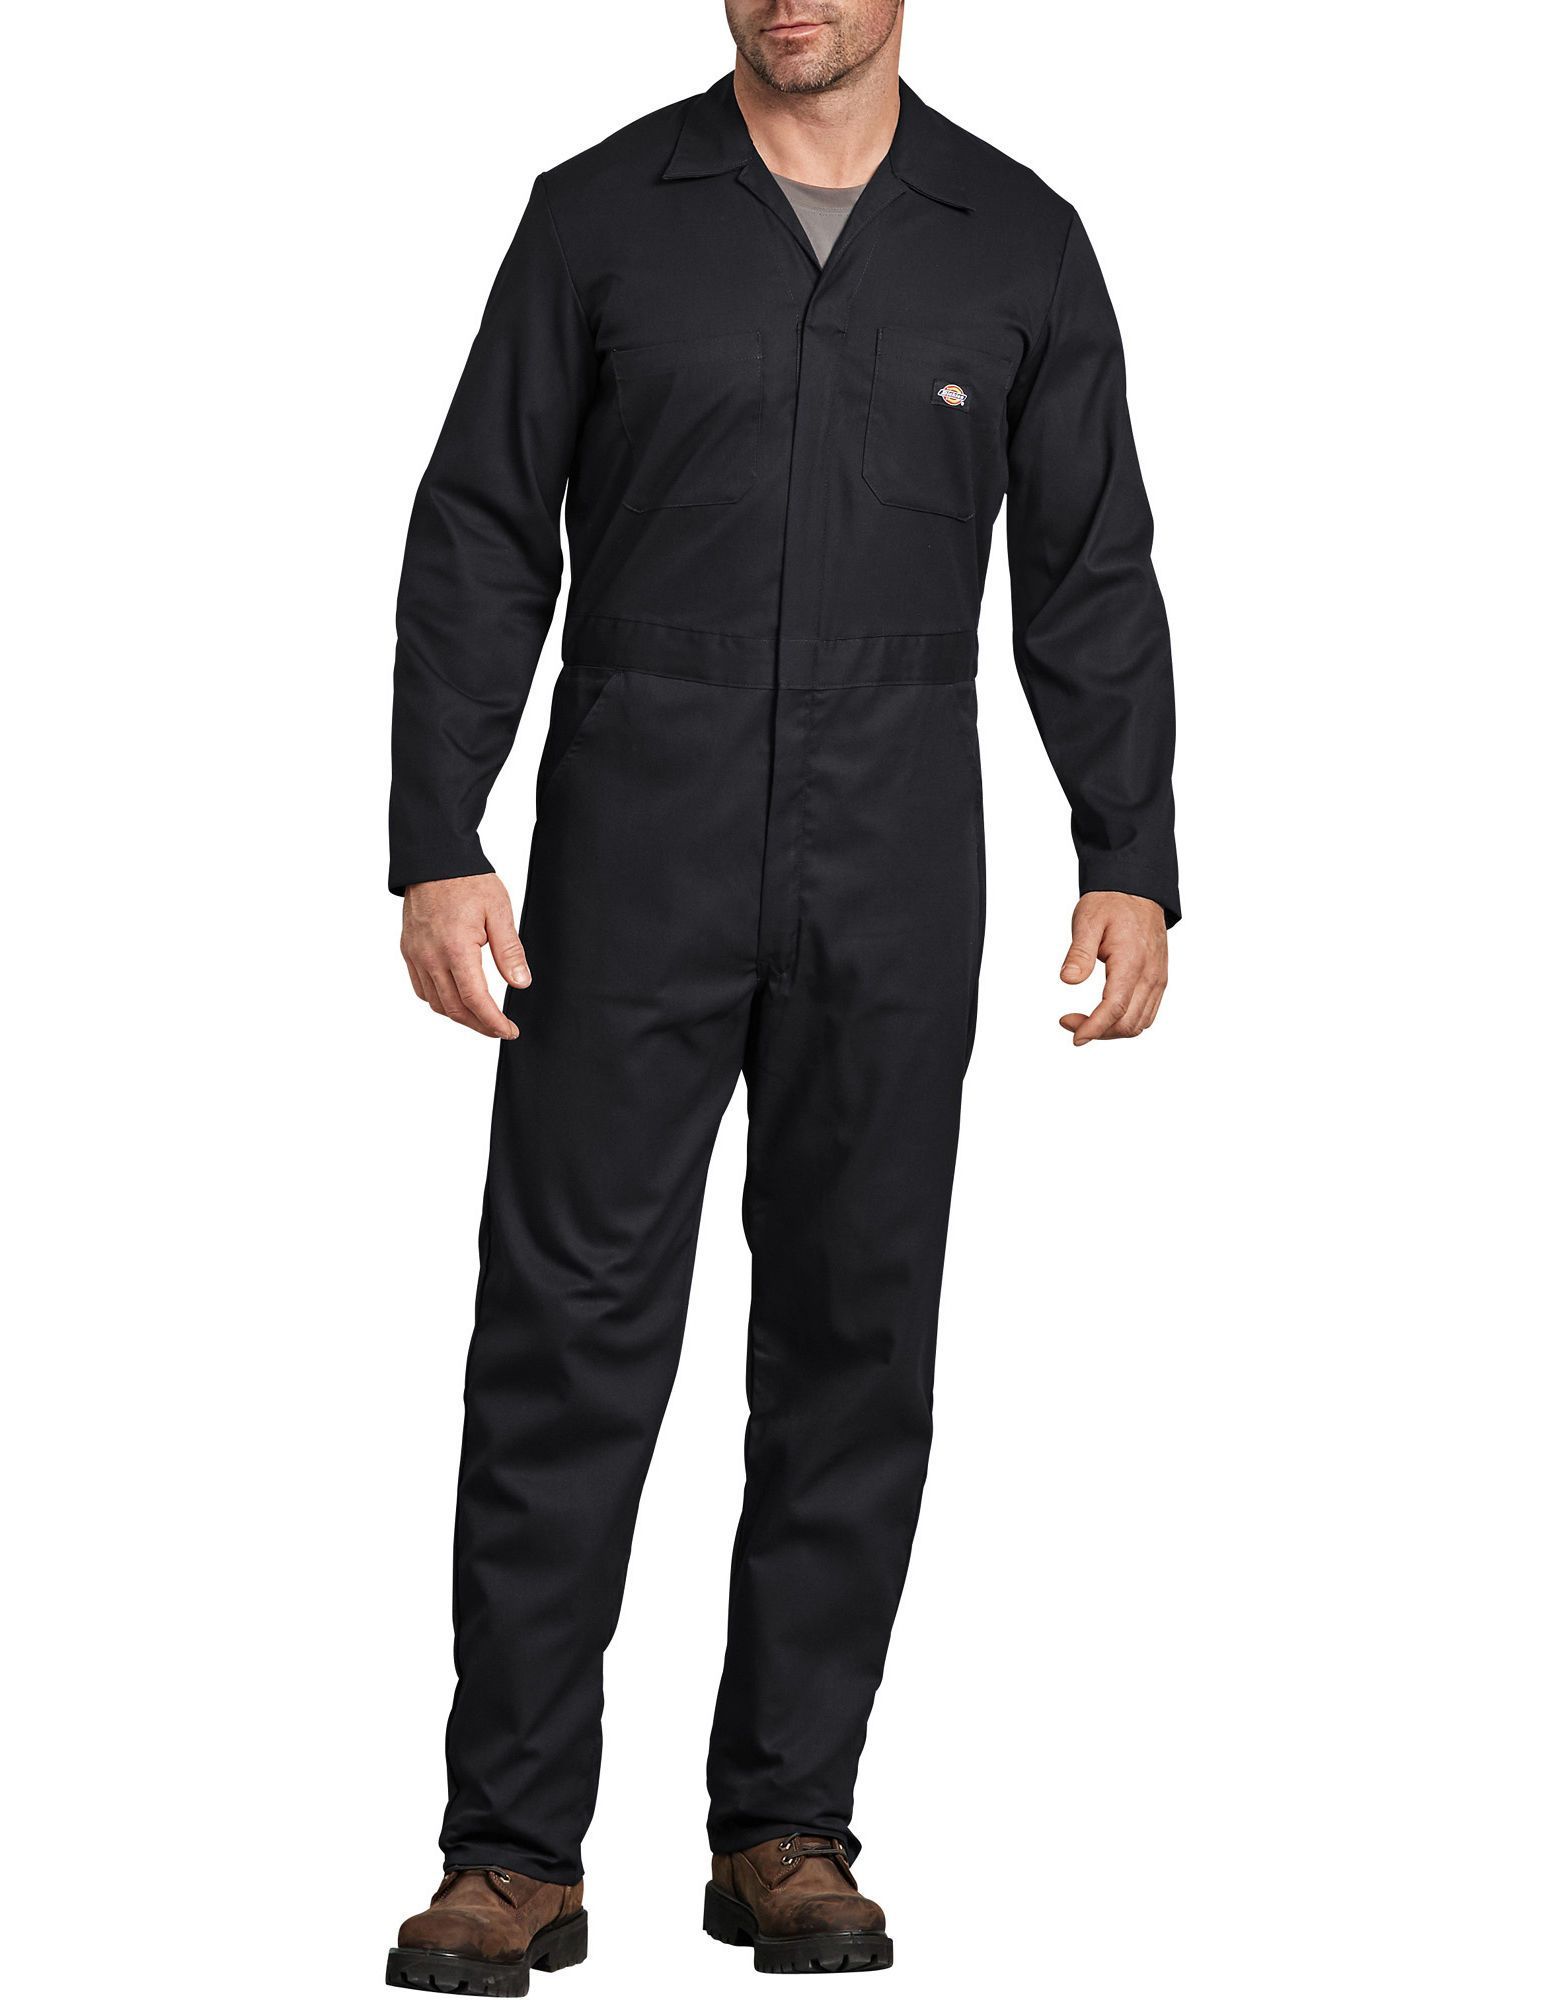 Dickie Coveralls Size Chart